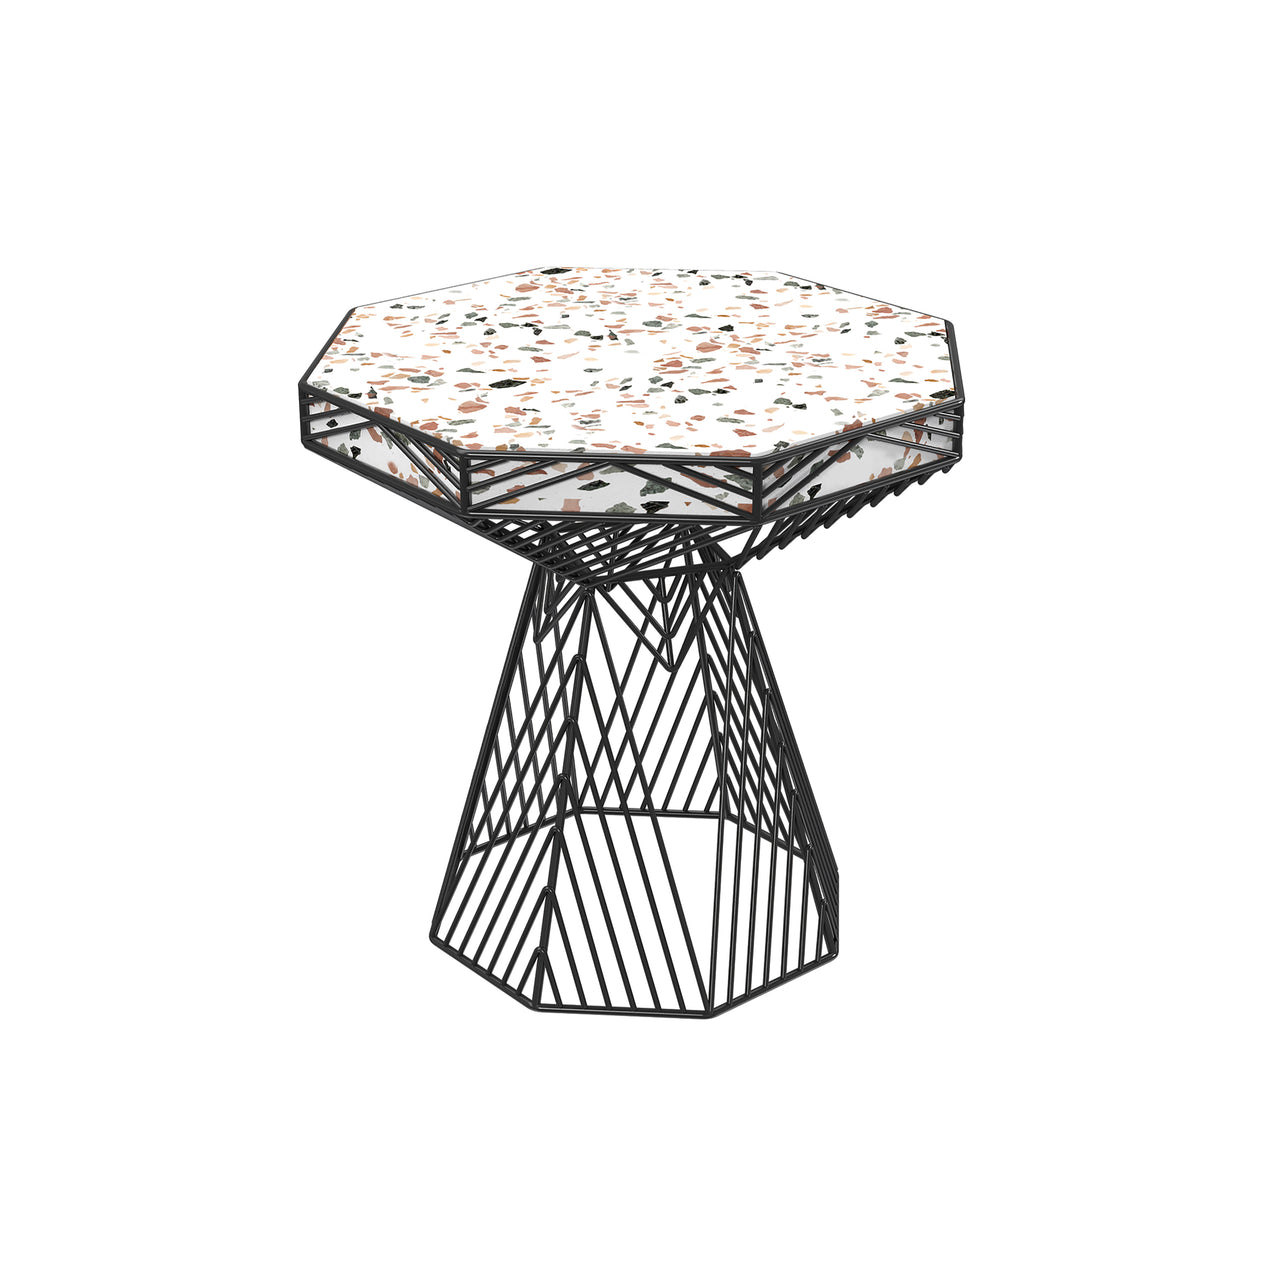 Switch Table/Stool: Color + Black + Terrazzo Marble